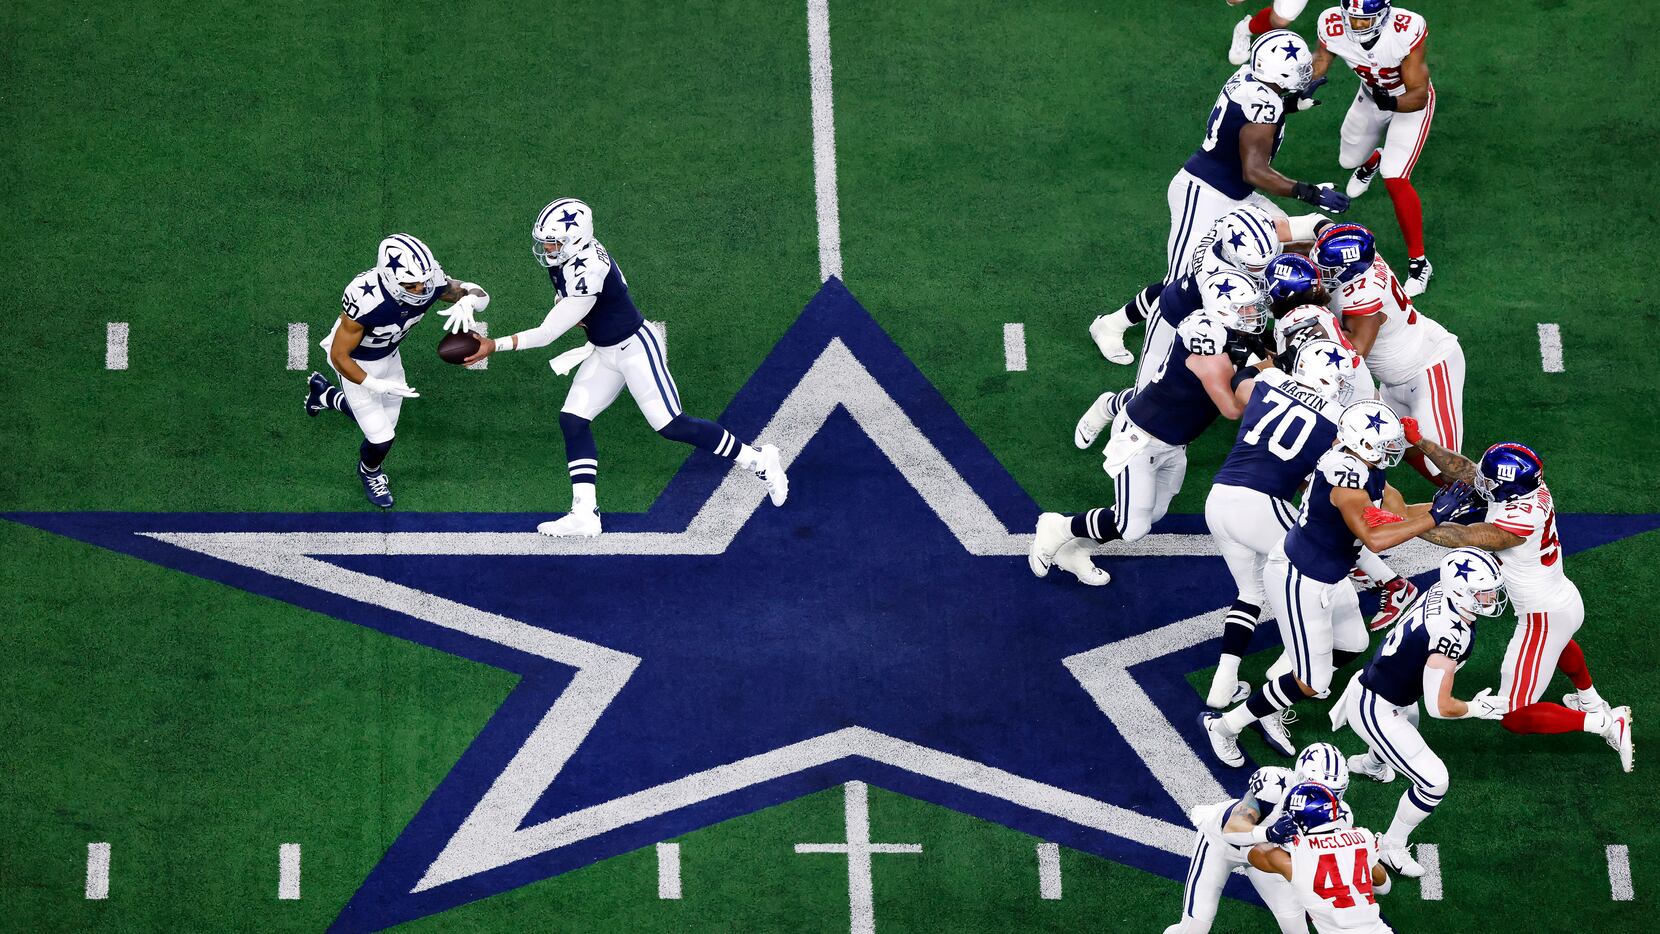 Cowboys-Giants Thanksgiving game sets record for most-watched